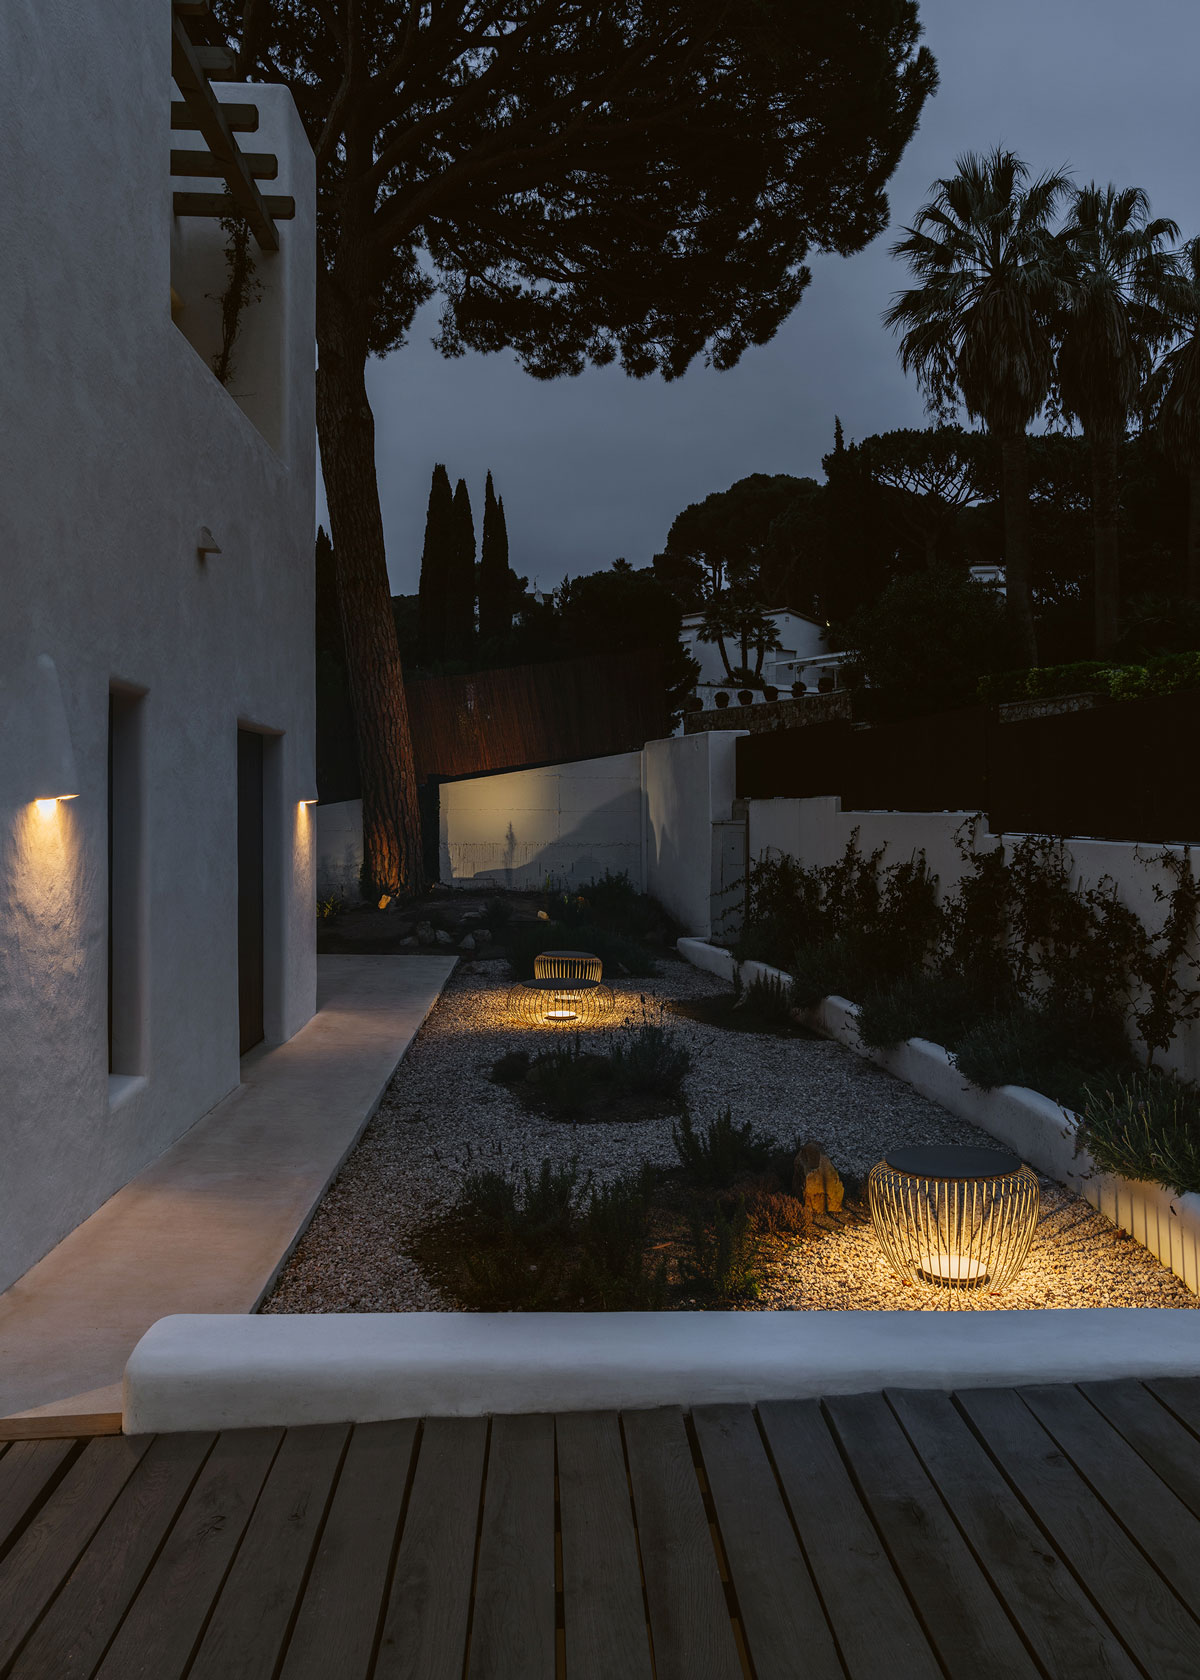 Vibia The Edit - Outdoor collection complements the organic architecture - Meridiano